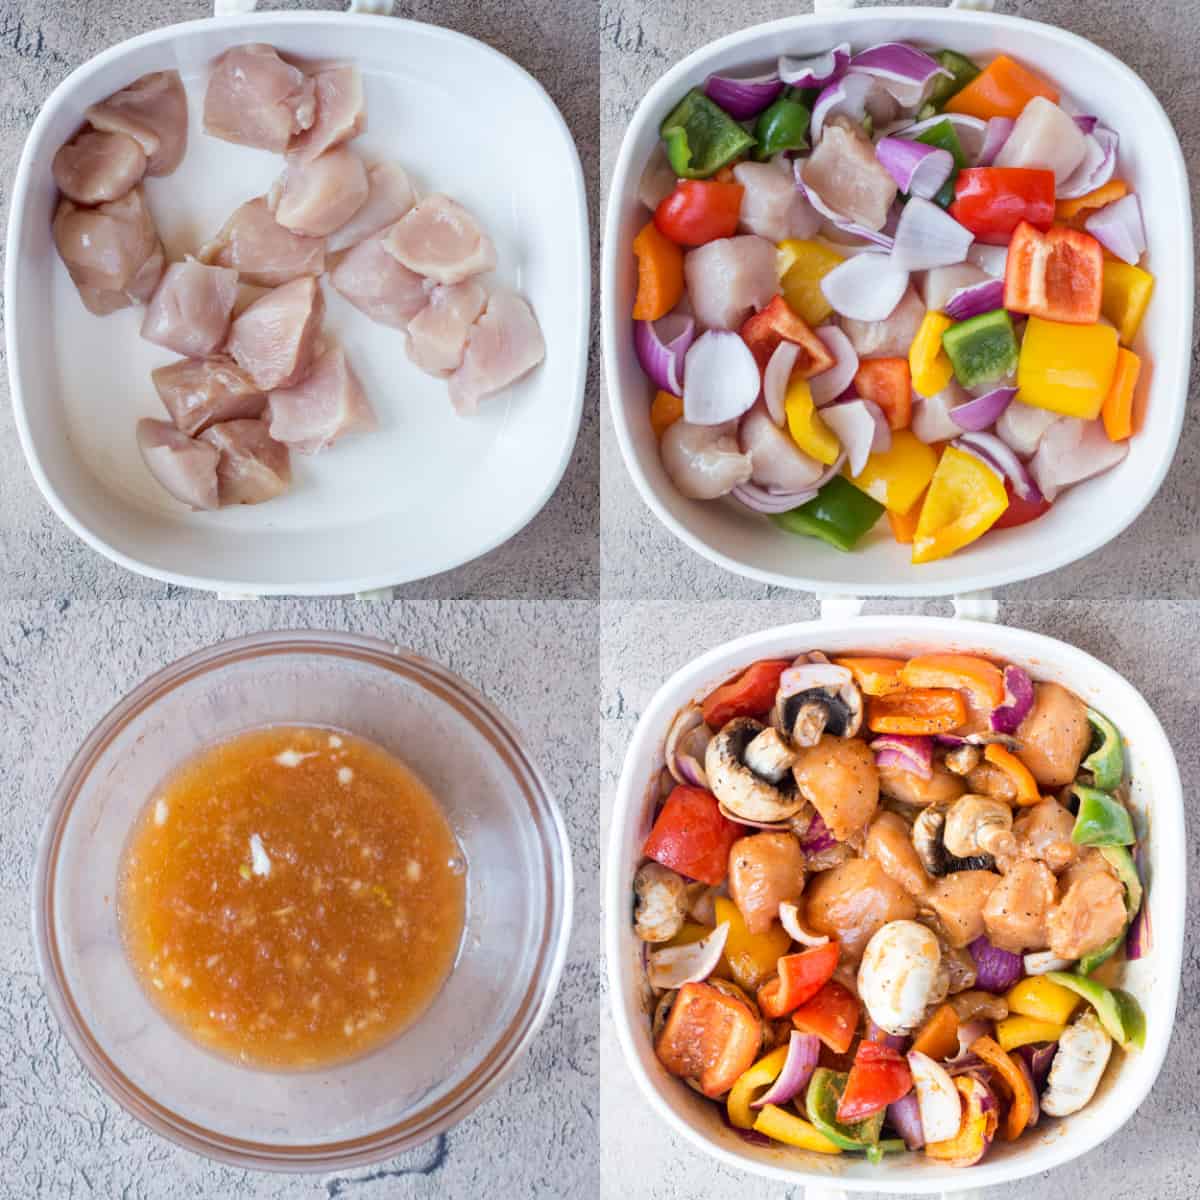 Step by step image collage of how to make grilled chicken kebabs.